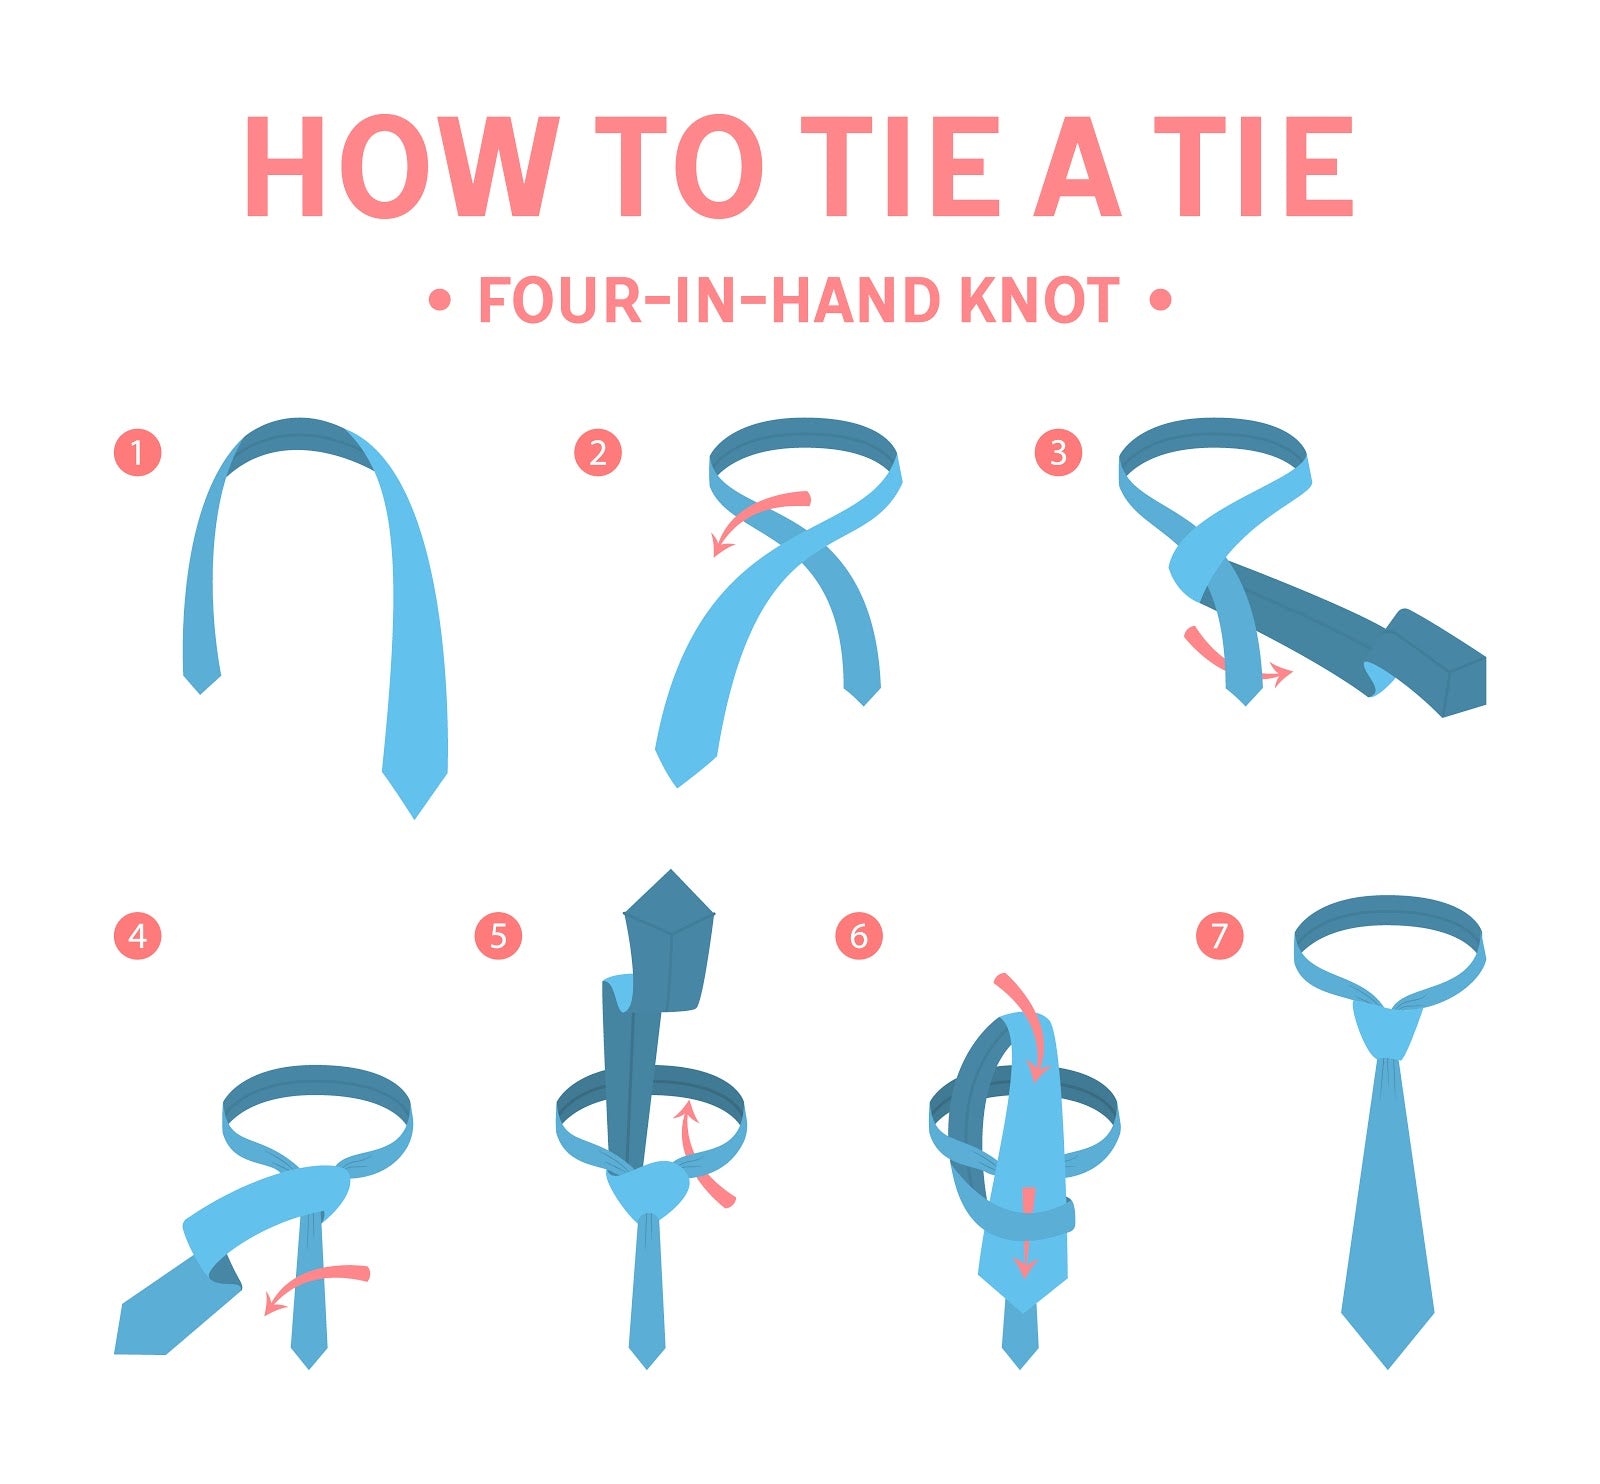 four-in-hand knot tie